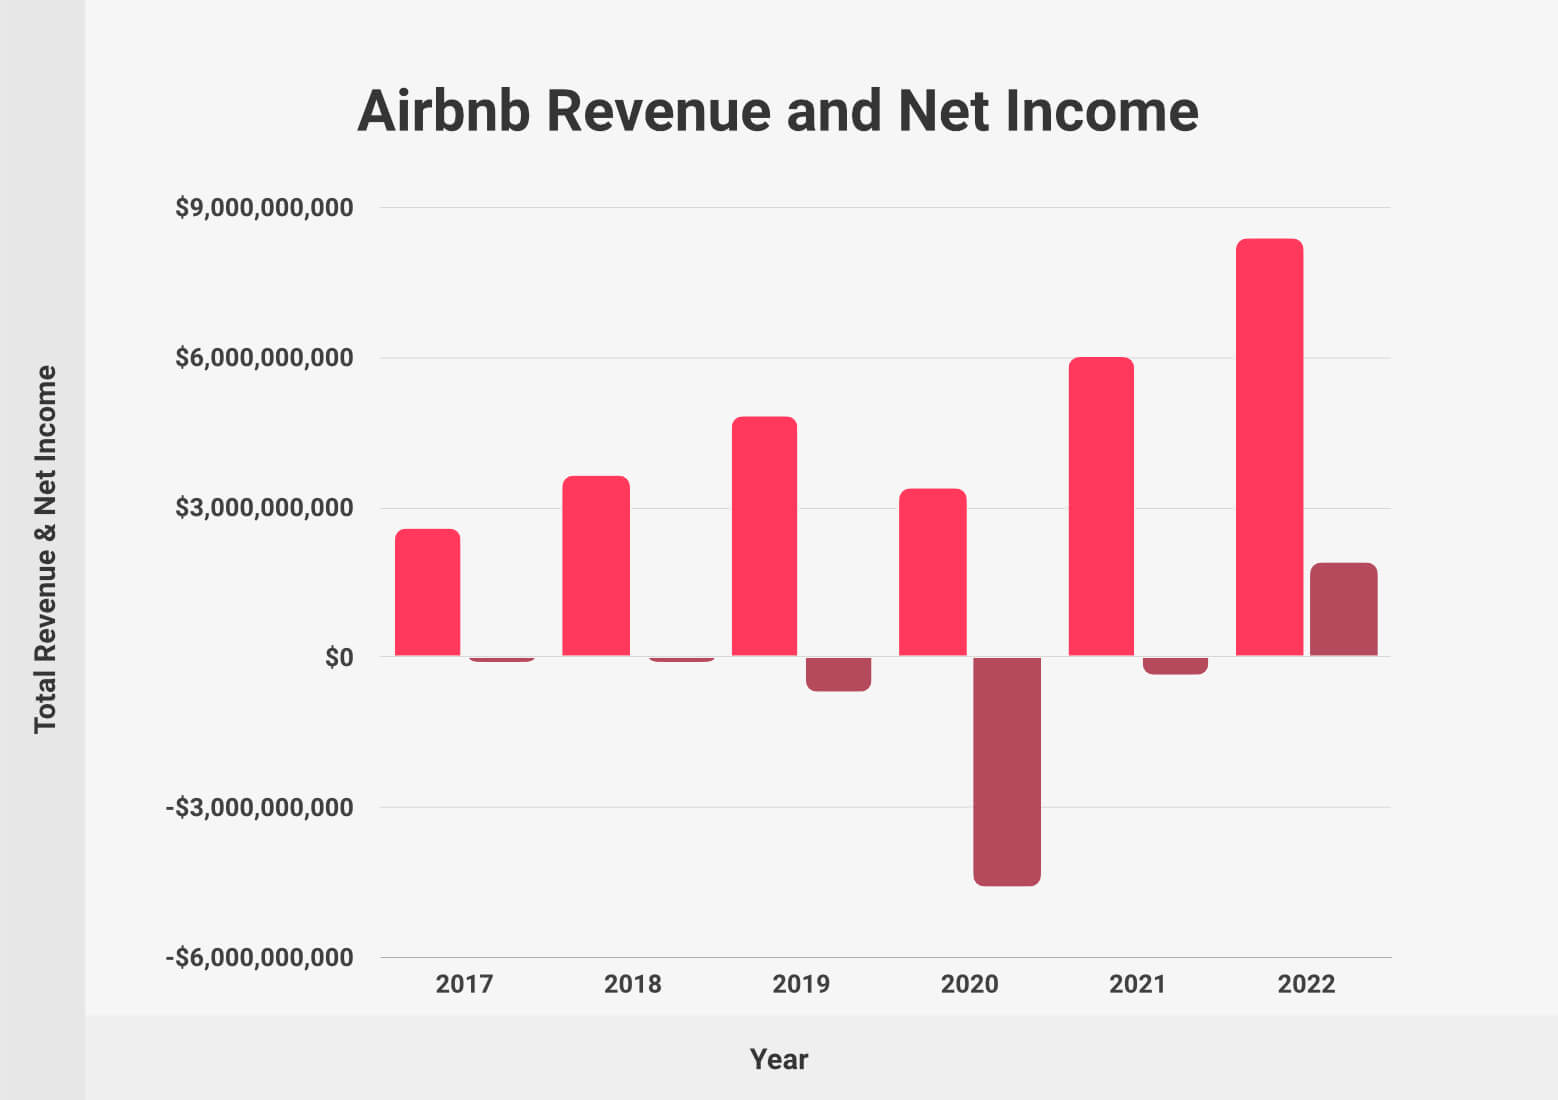 Airbnb Revenue and Net Income